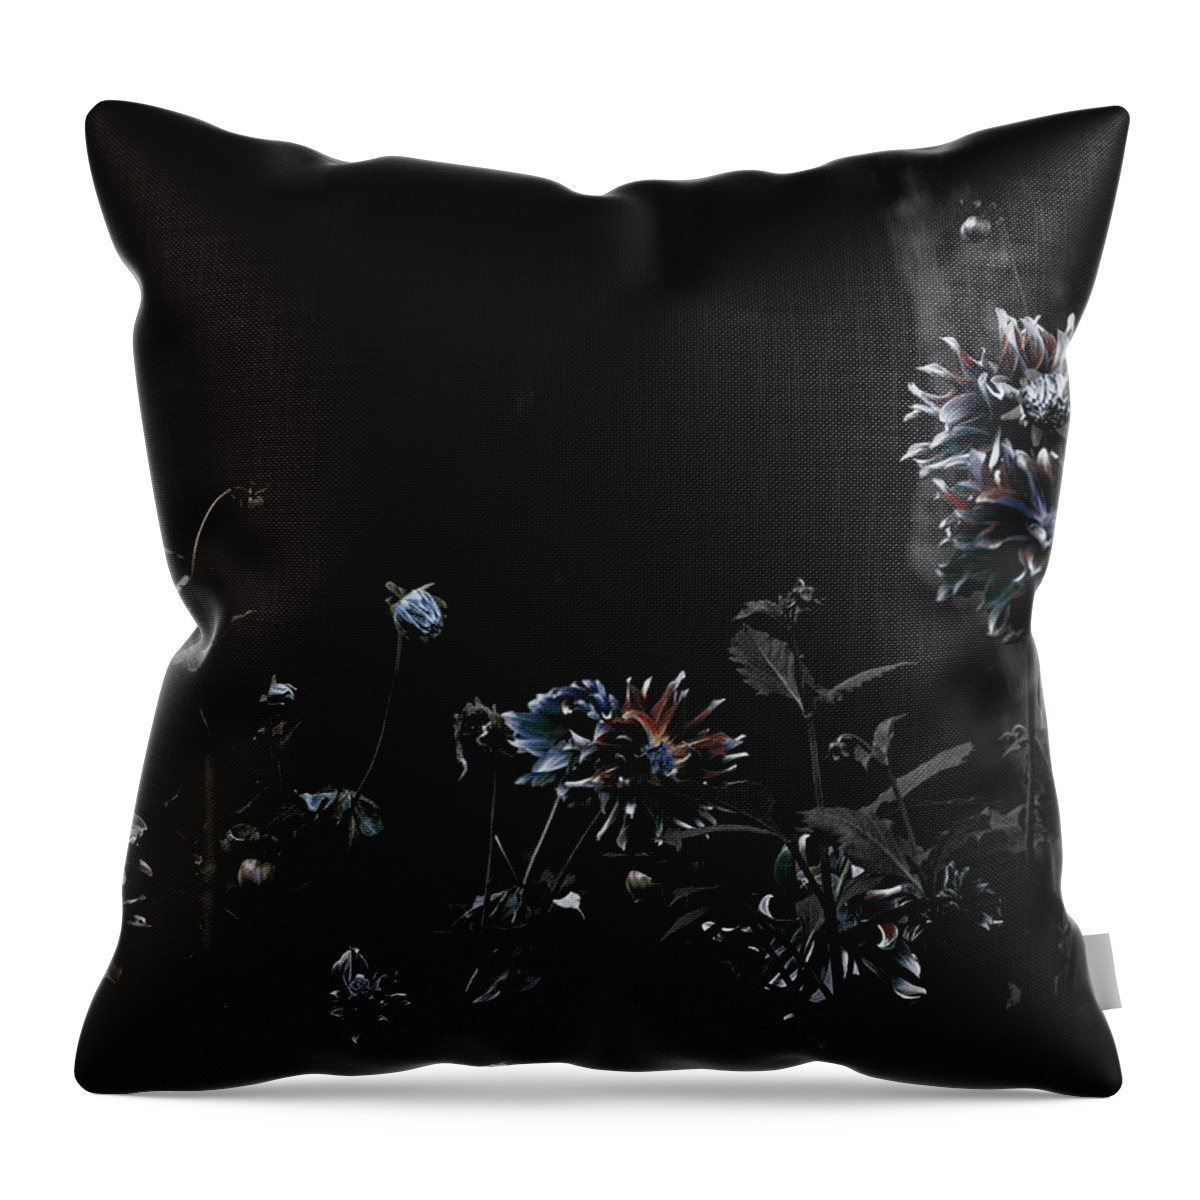 Dahlias Throw Pillow featuring the photograph Beyond the Reasonable Doubt by Cynthia Dickinson